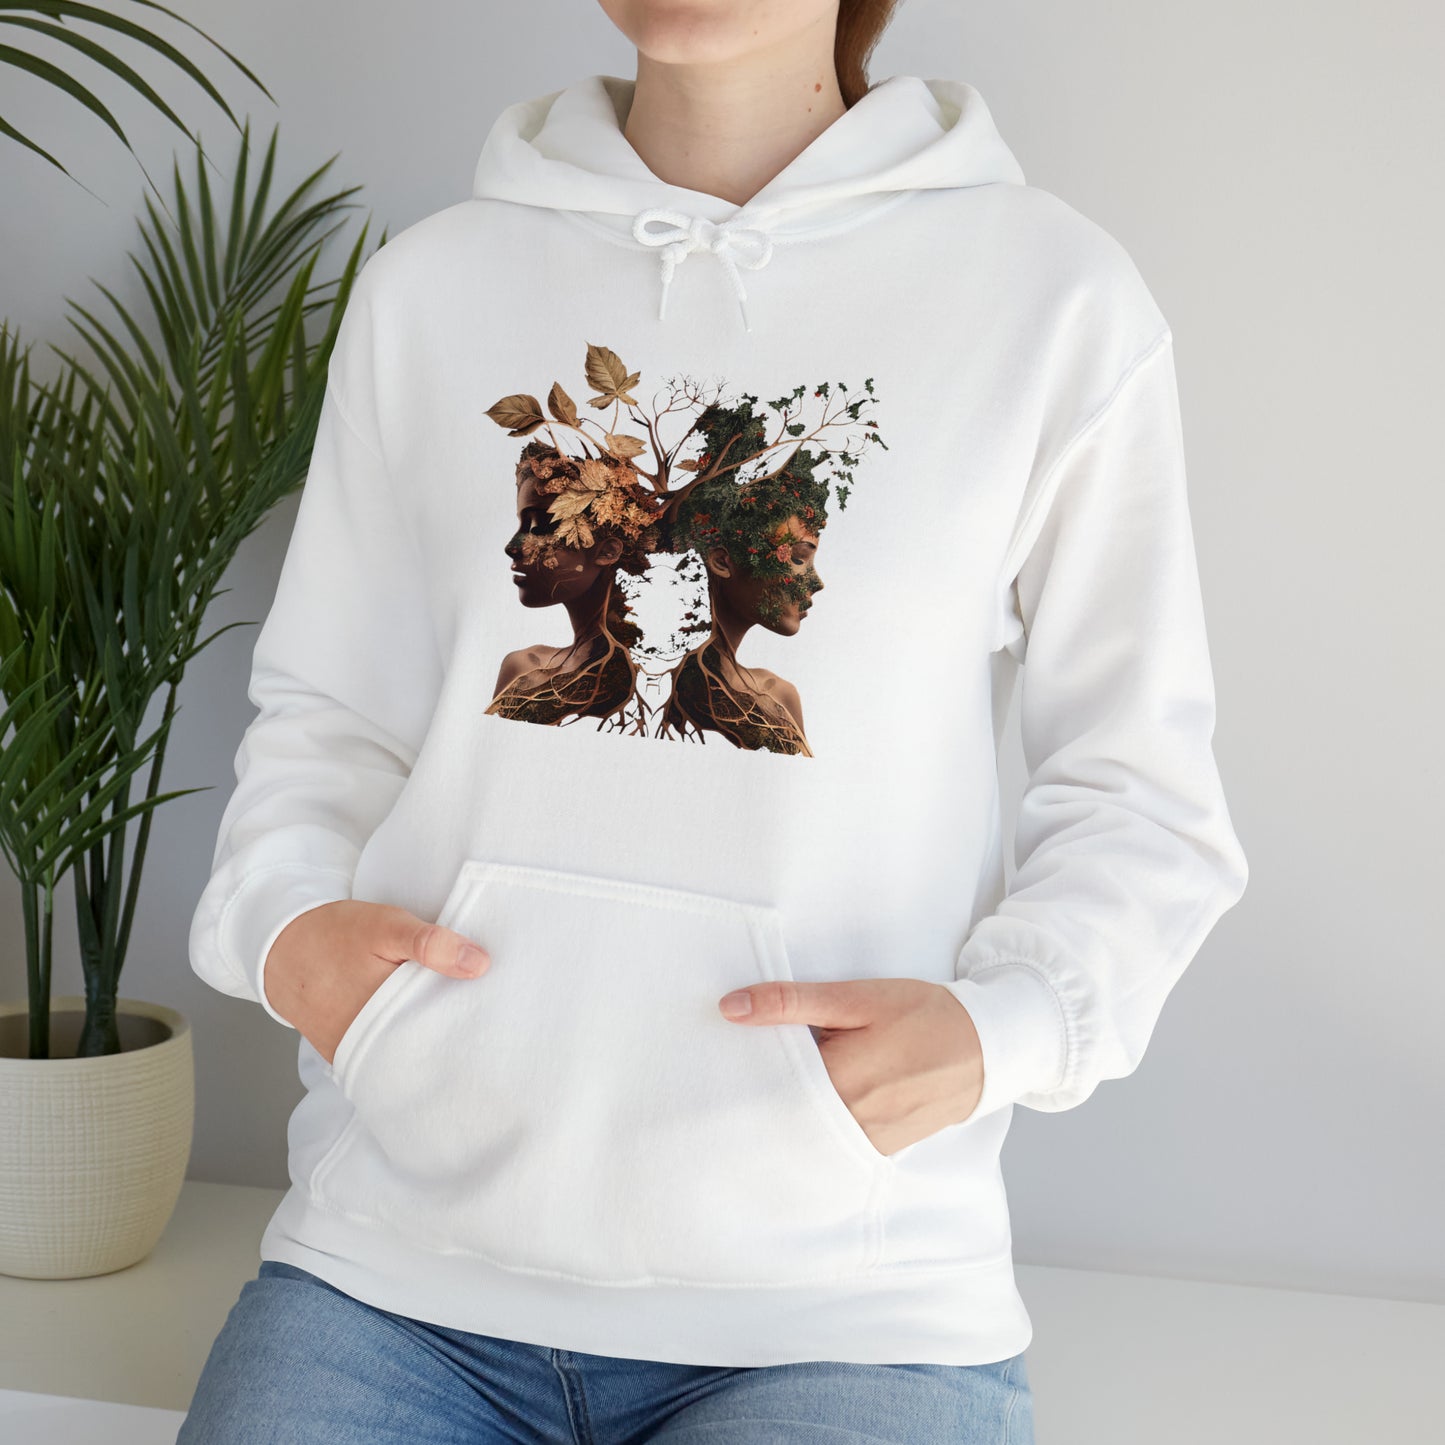 rooted together hoodie